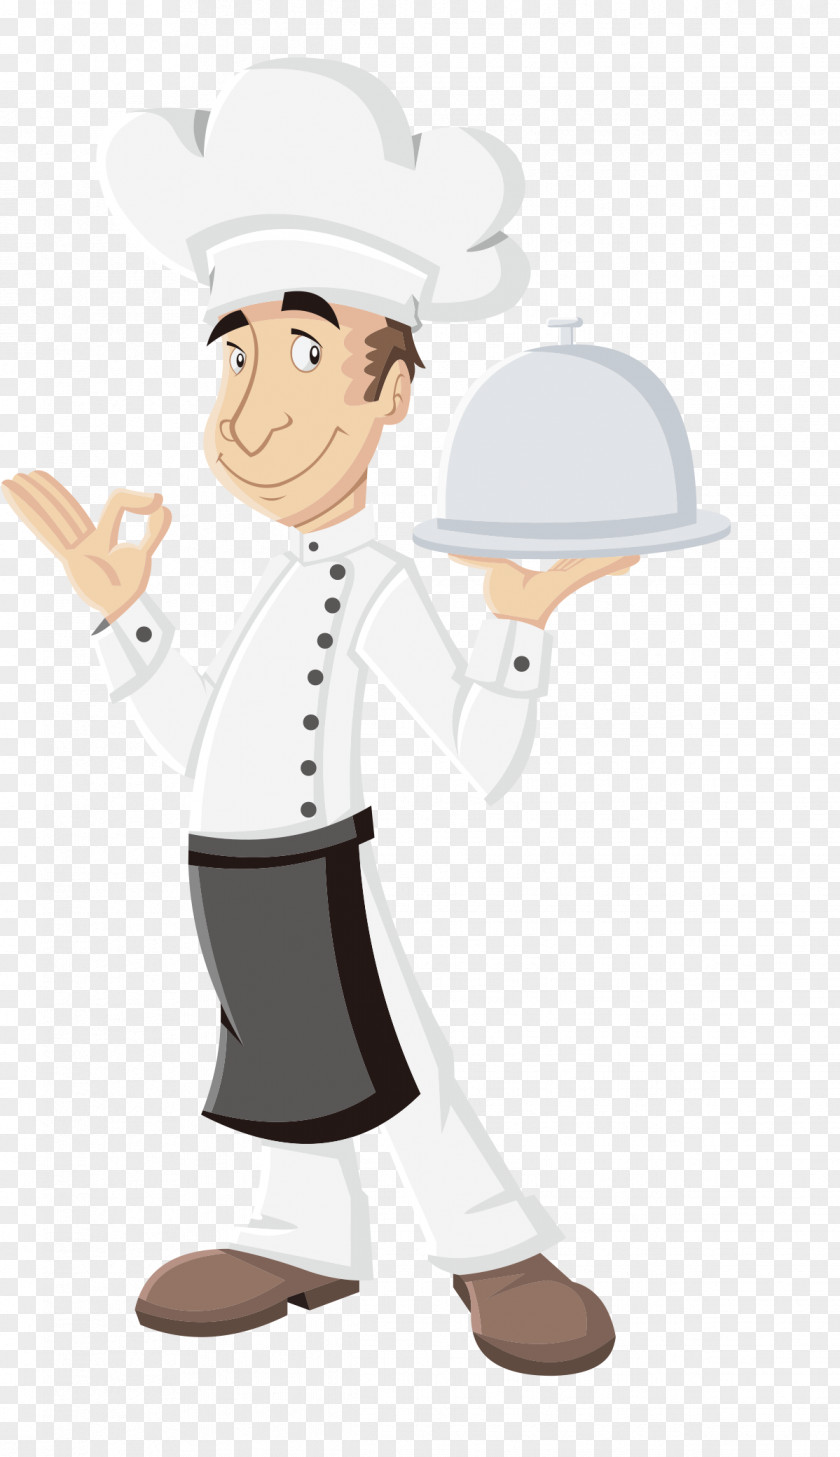 Career Graphic Chef Cooking Restaurant Image PNG